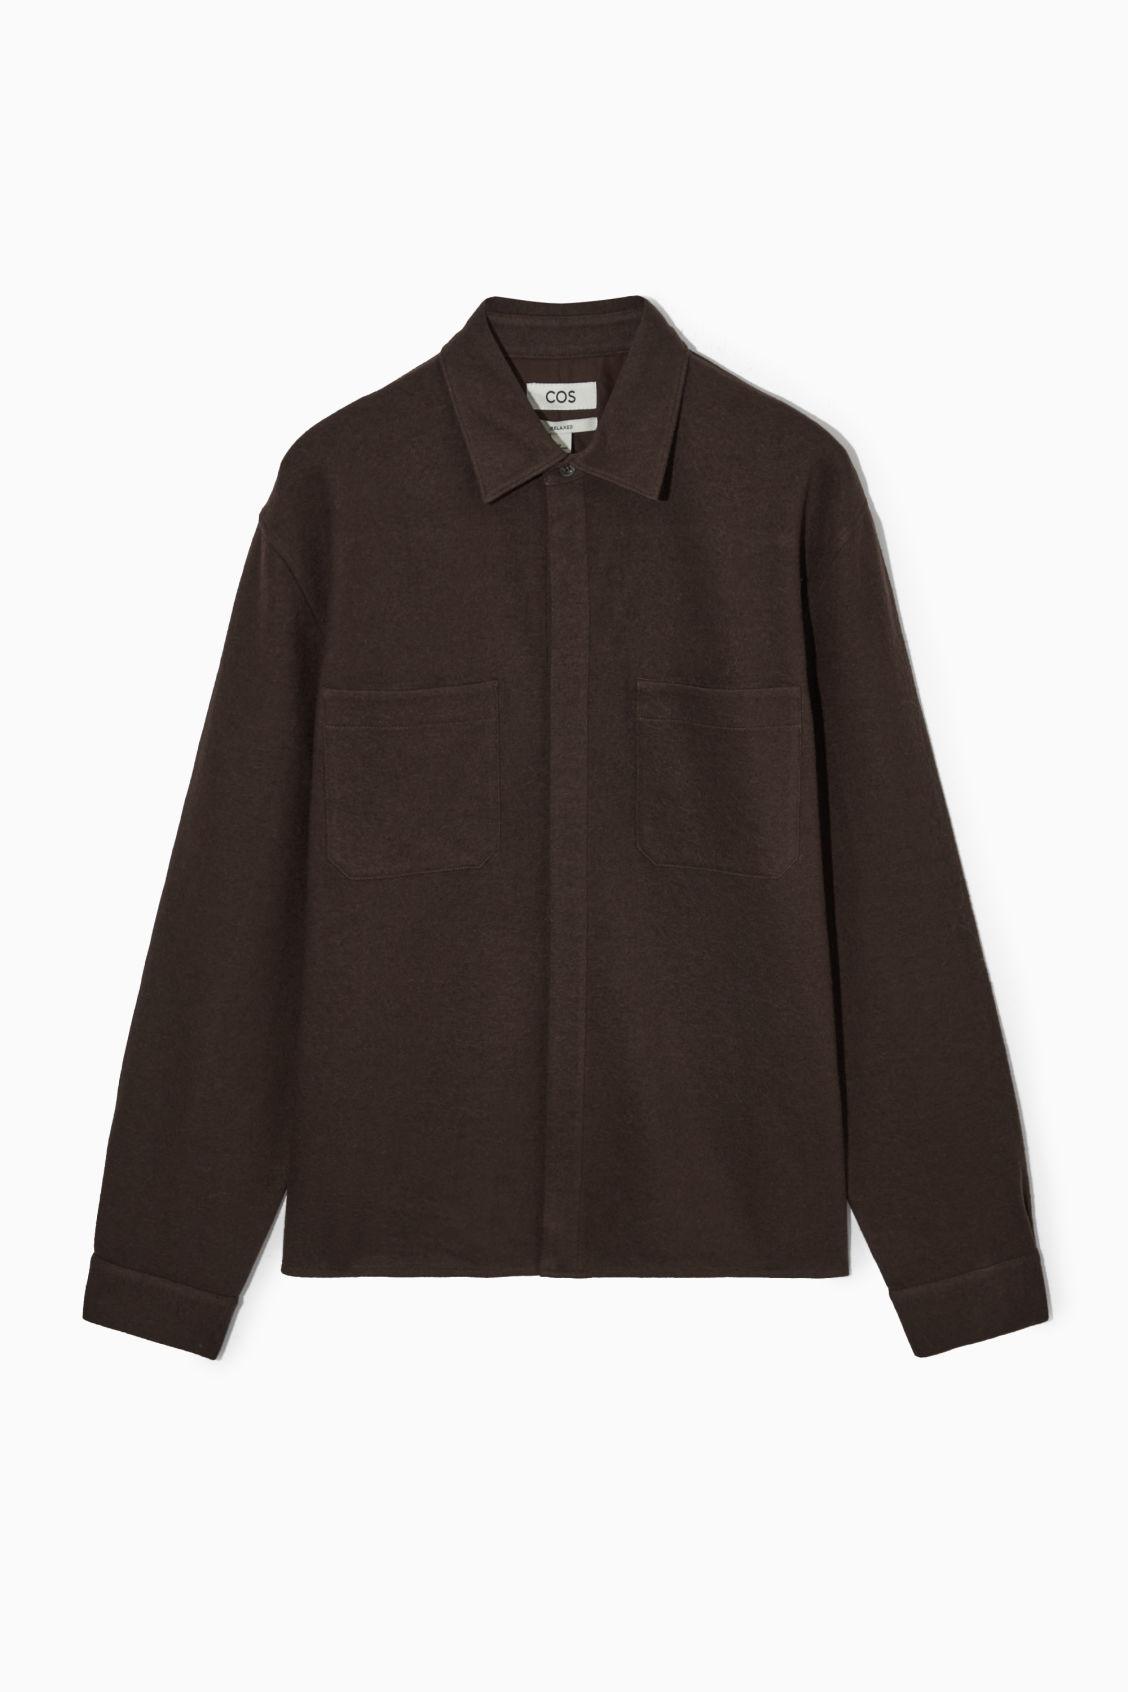 COS Relaxed-fit Wool Overshirt in Brown for Men | Lyst